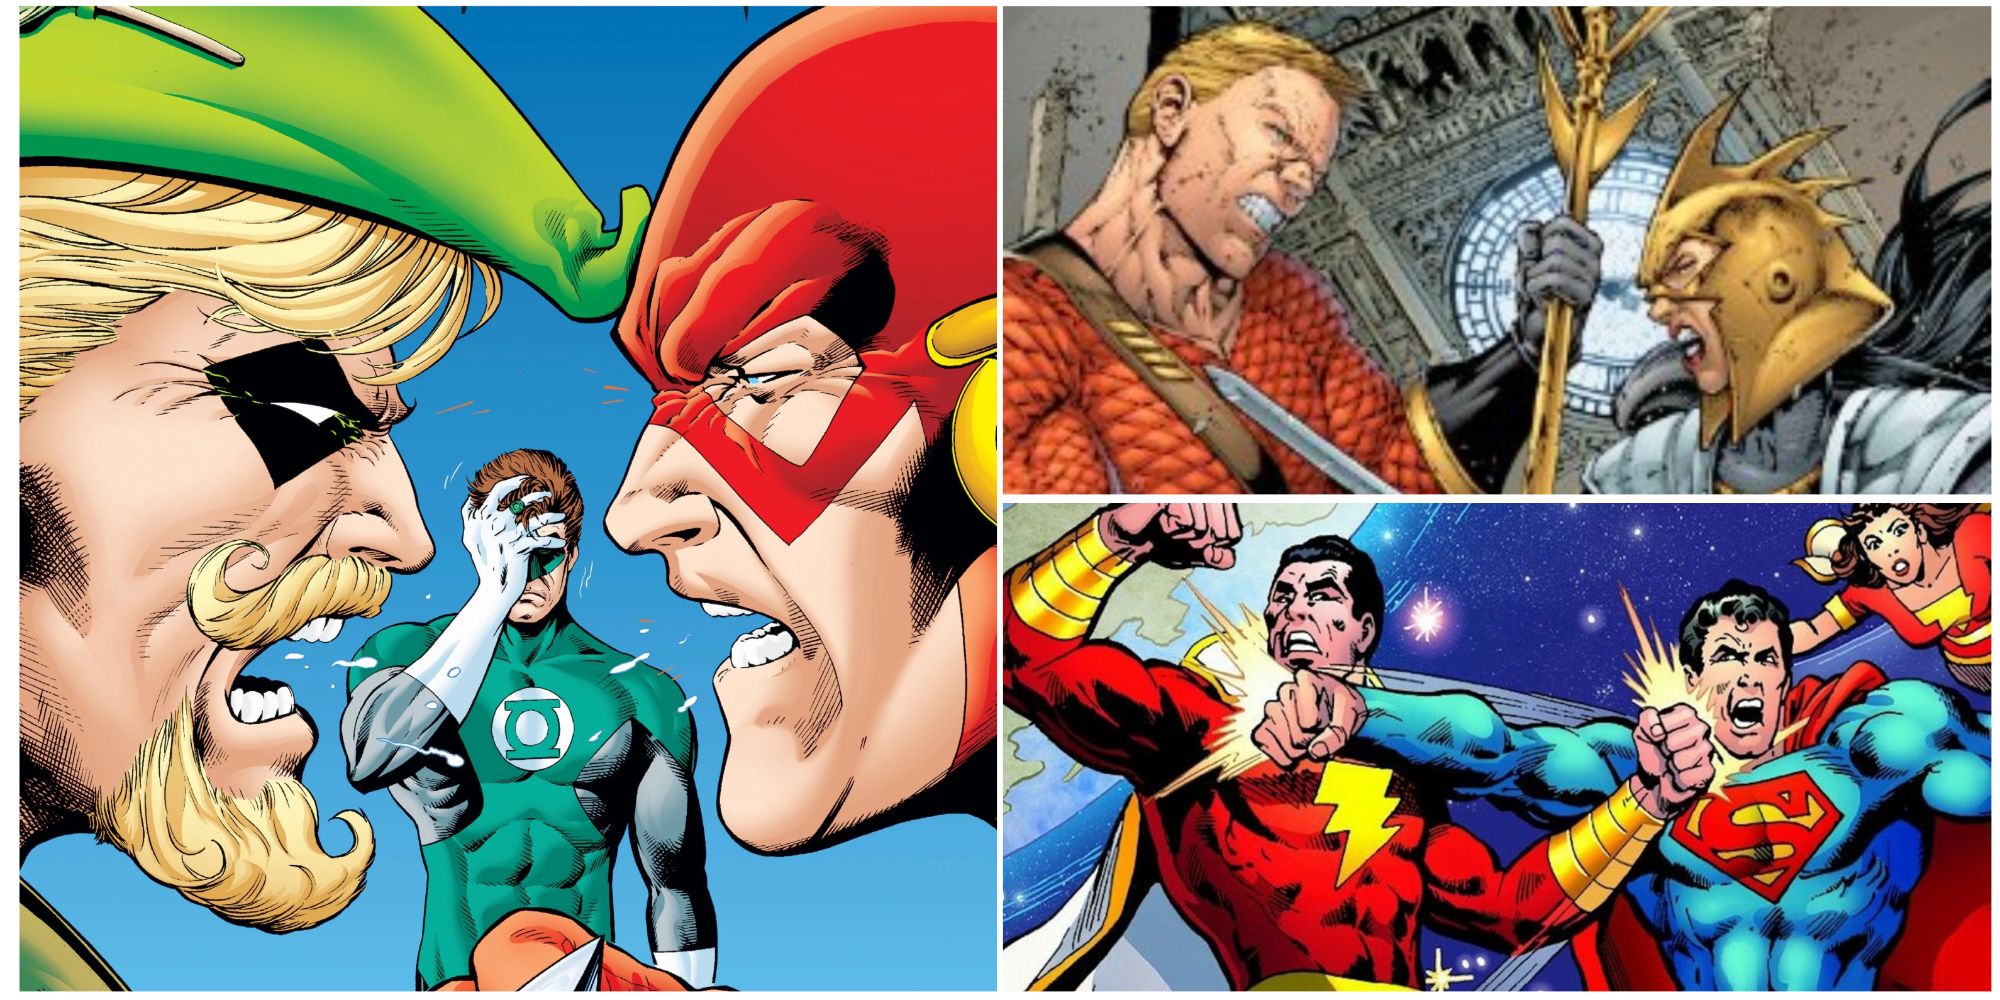 Clockwise from left: Green Arrow and Flash argue in front of Green Lantern, Aquaman and Wonder Woman fight, and Superman and Shazam trade punches